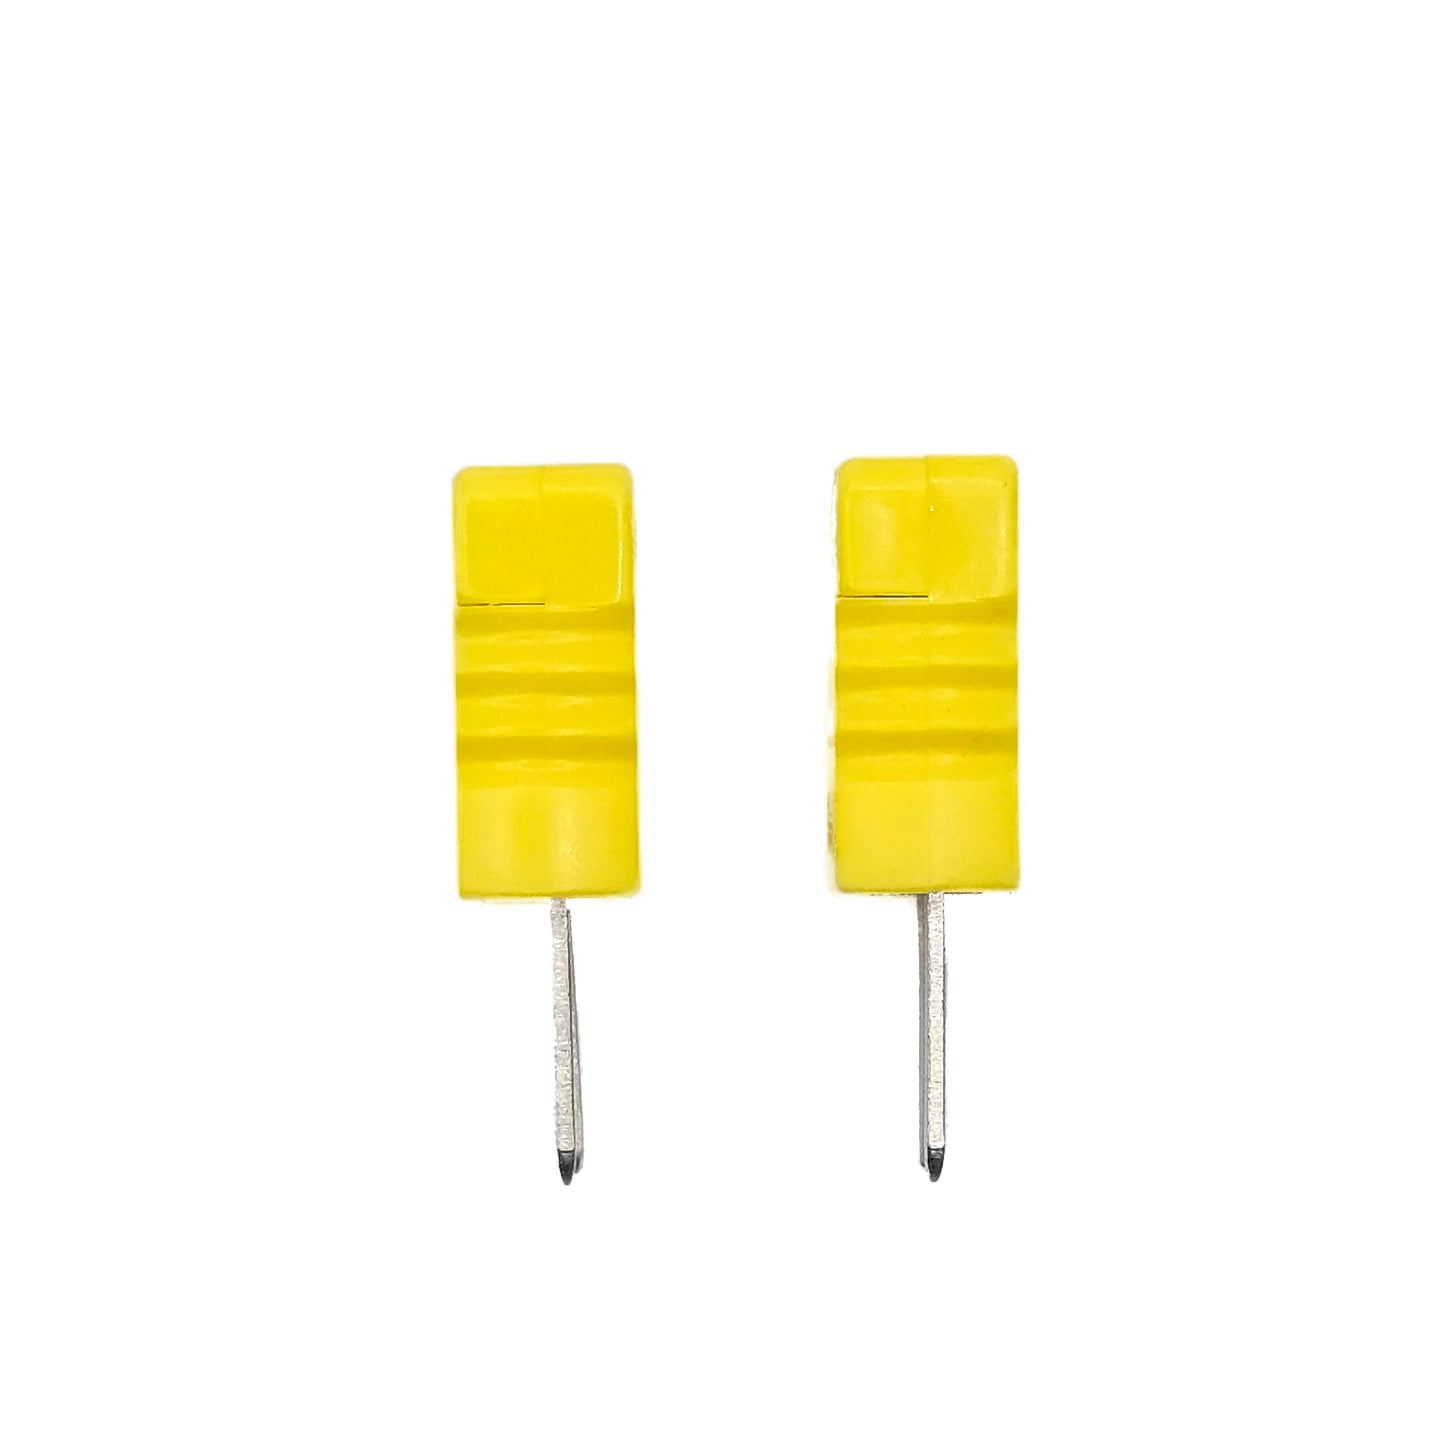 Type K Mini Thermocouple Connector - Male, 2-Pack